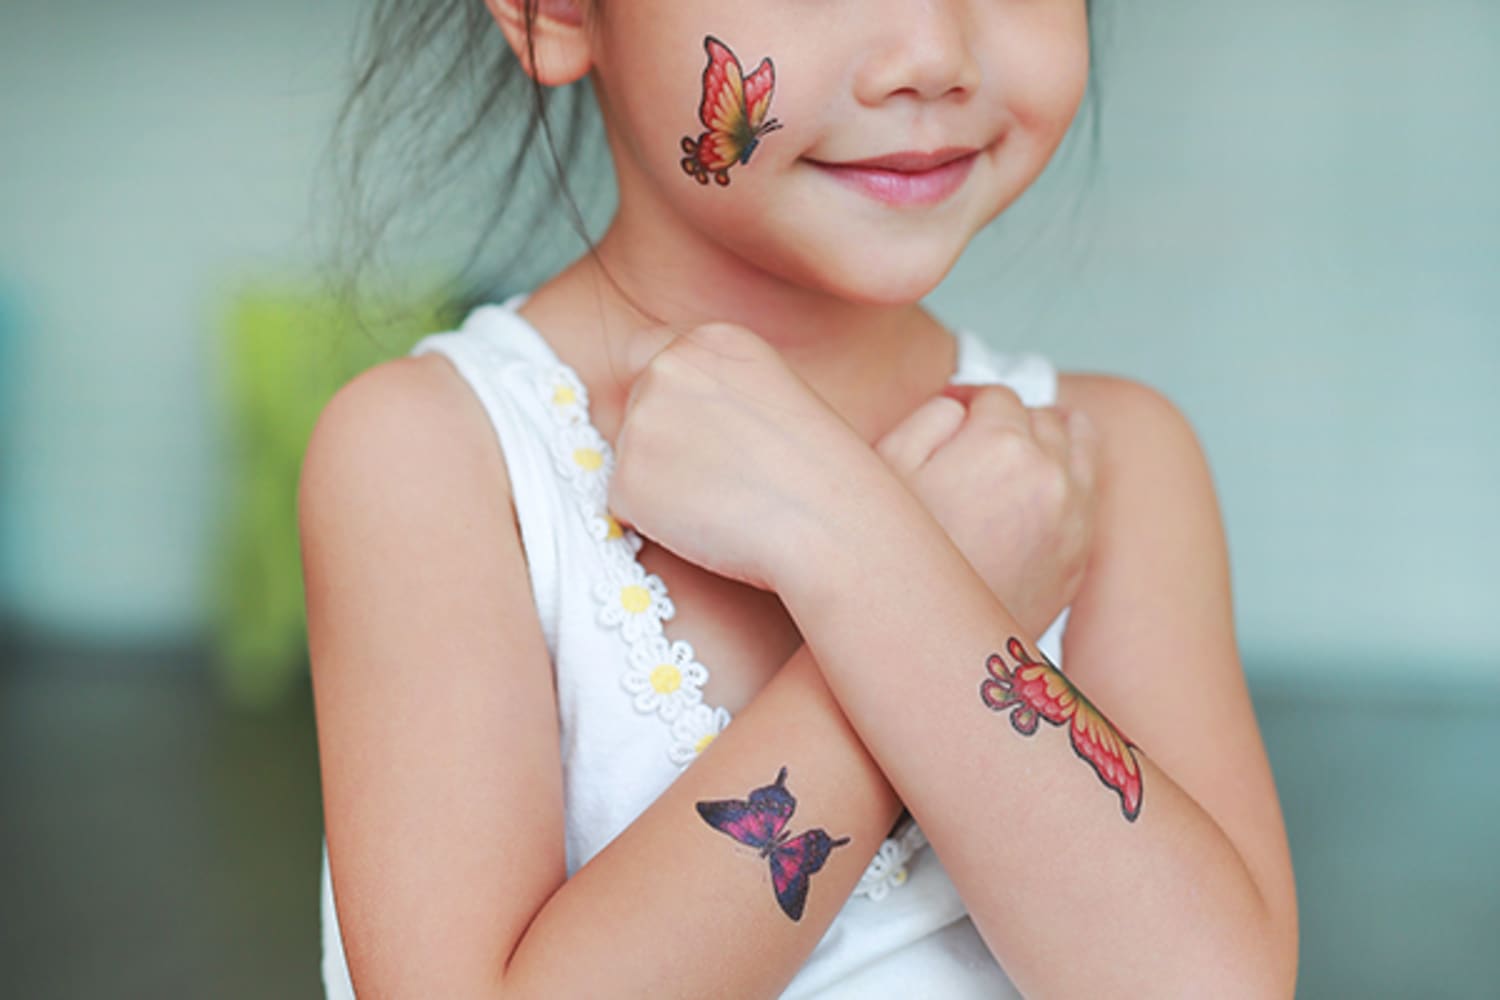 Fake Flower Tattoos for Kids - wide 2